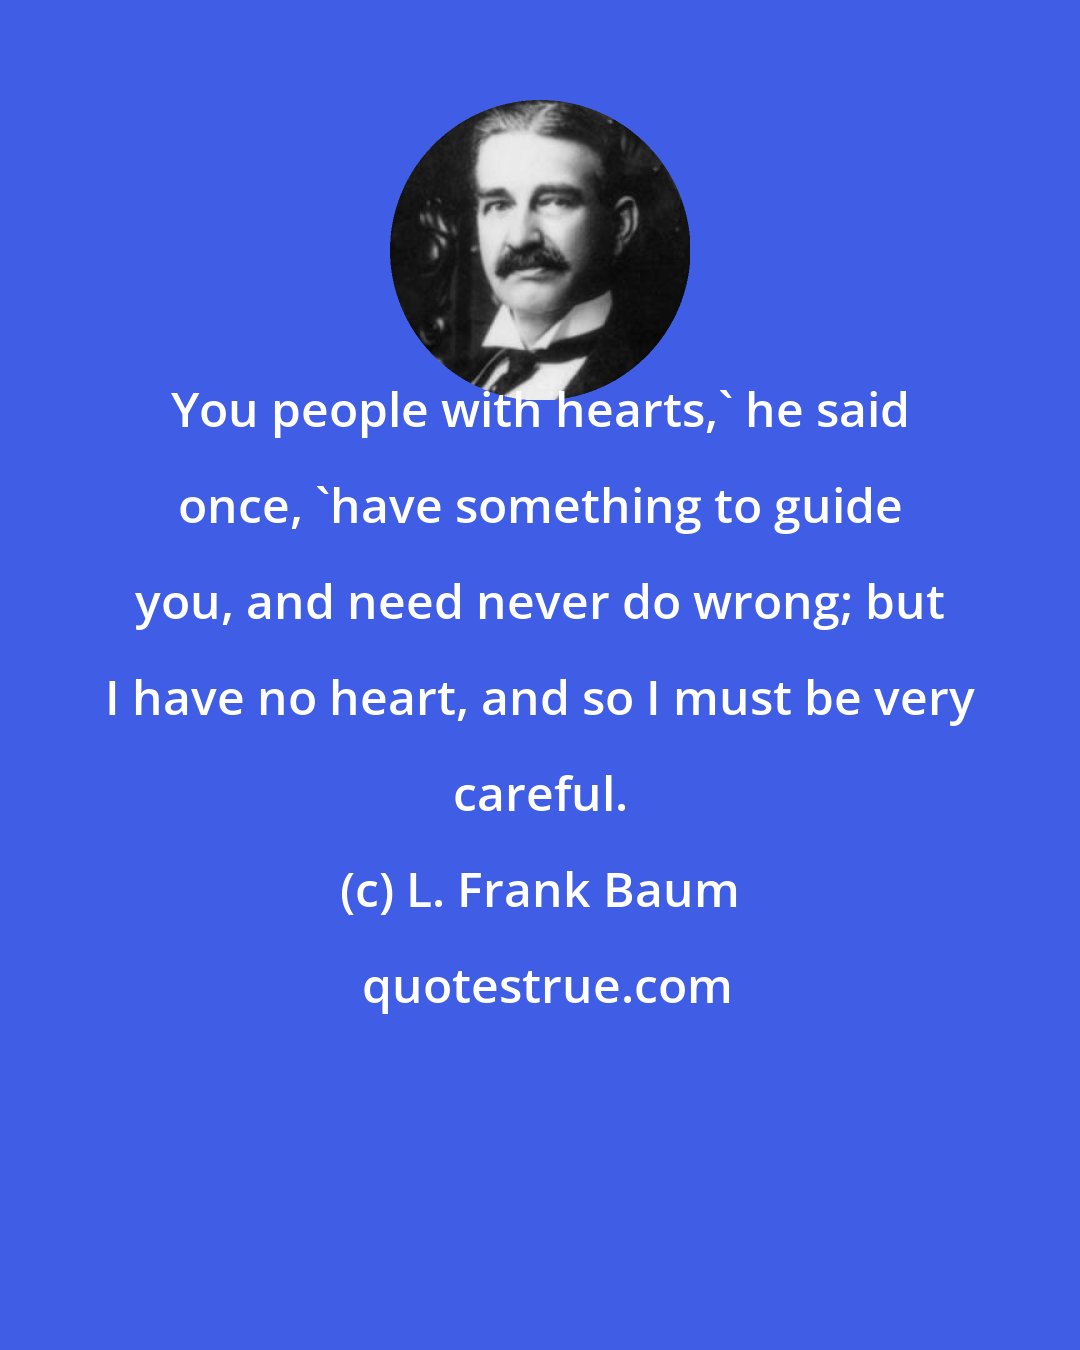 L. Frank Baum: You people with hearts,' he said once, 'have something to guide you, and need never do wrong; but I have no heart, and so I must be very careful.